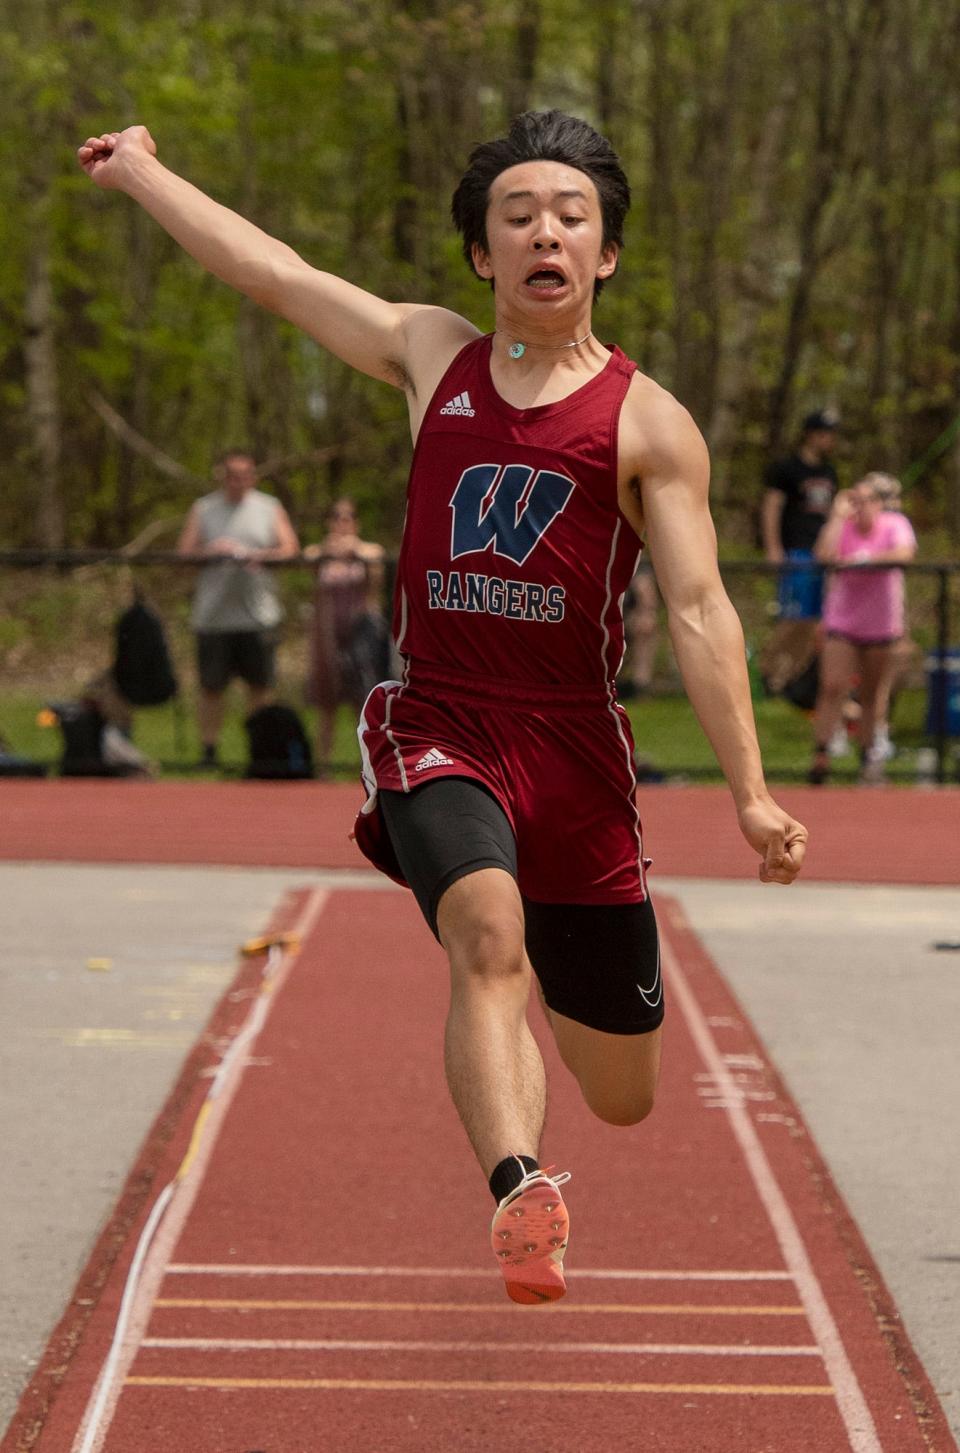 Westborough's Alan Nguyen won the long jump at last year's Central Mass. Division 1 championships.